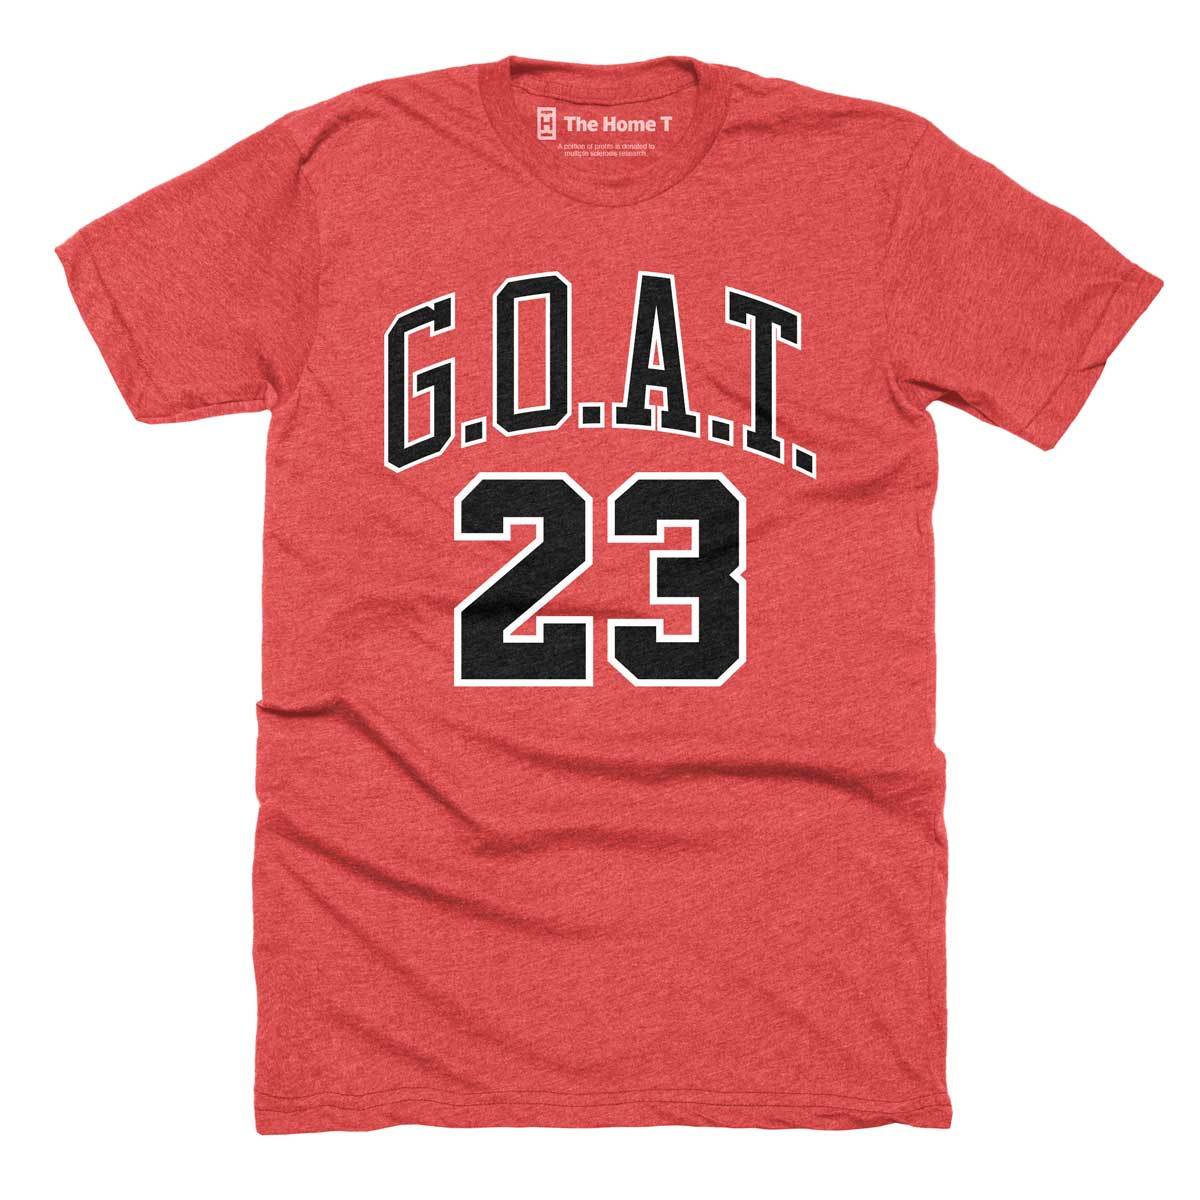 The G.O.A.T The Home T XS Red